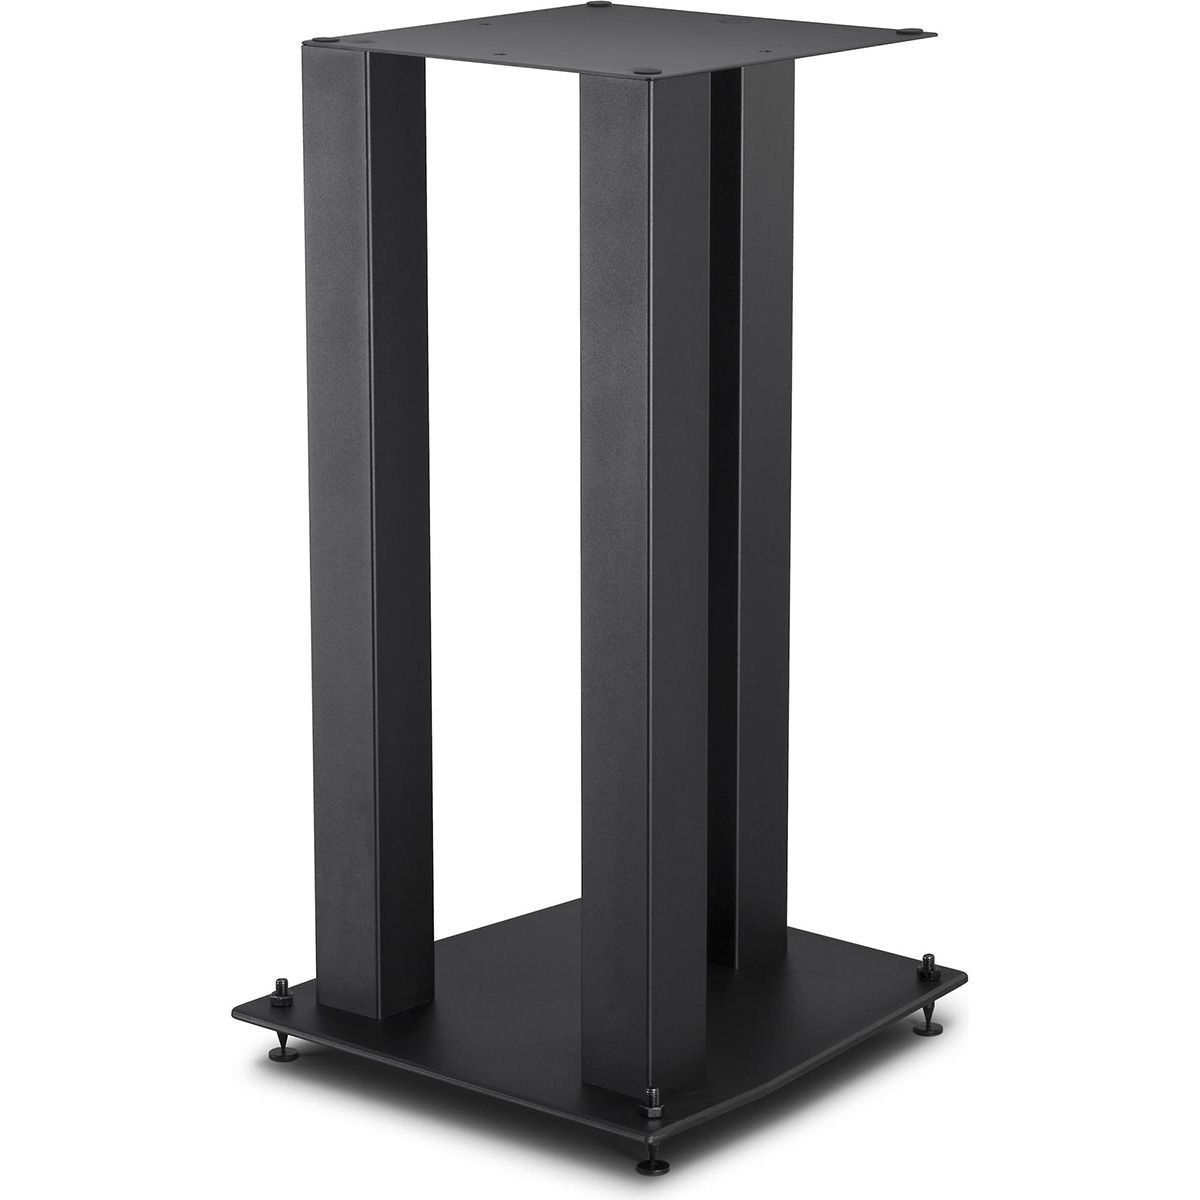 SourcePoint 8 Speakers Stands Side View